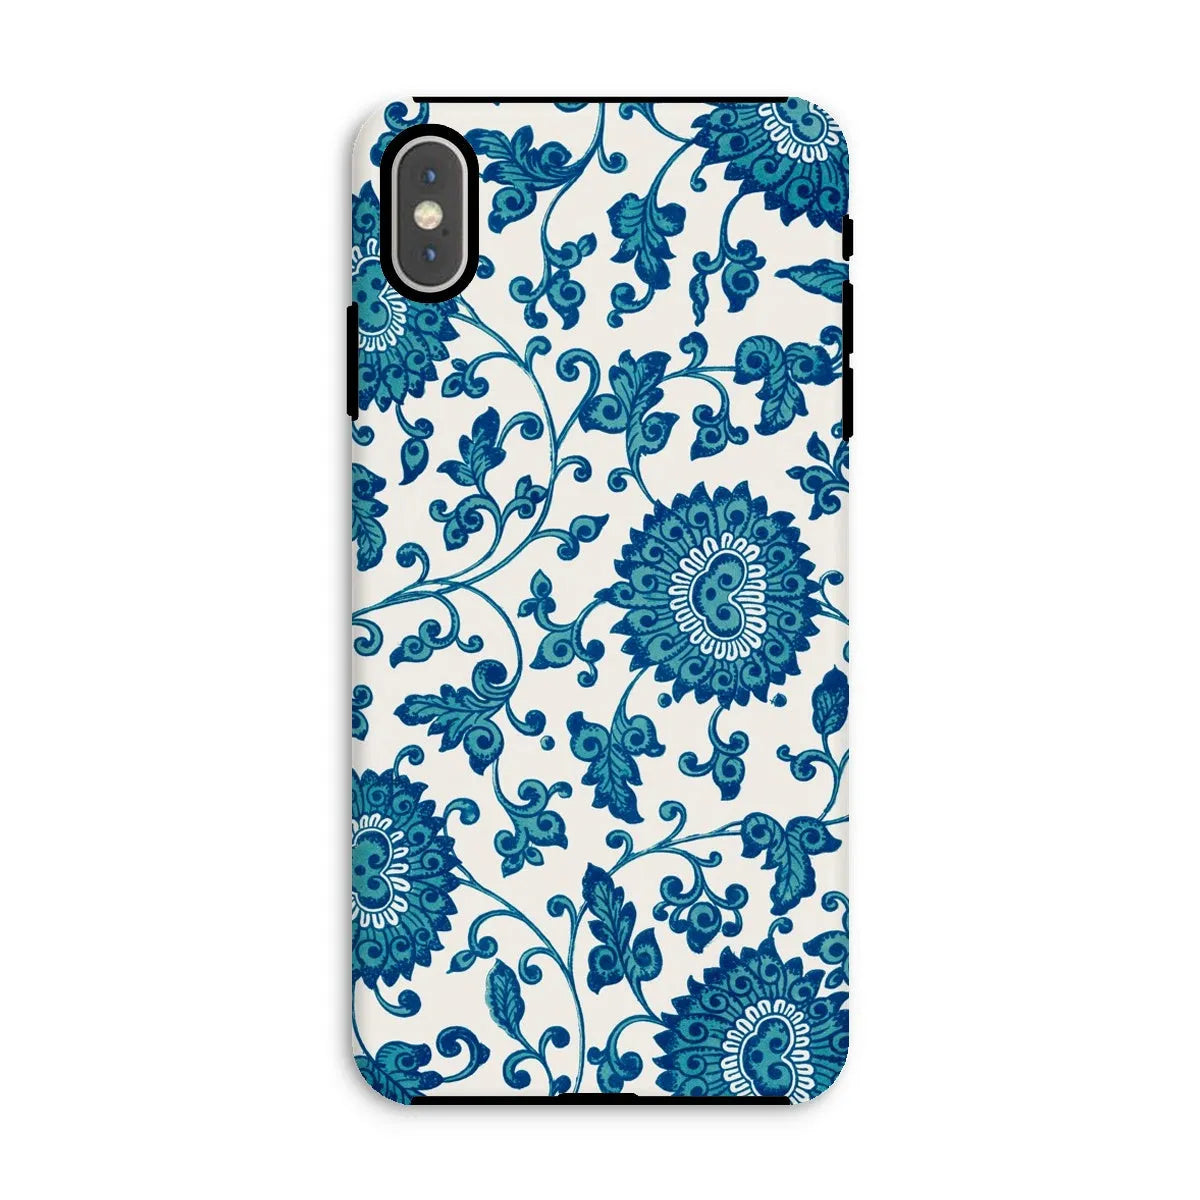 Blue And White Floral Aesthetic Art Phone Case - Owen Jones - Iphone Xs Max / Matte - Mobile Phone Cases - Aesthetic Art